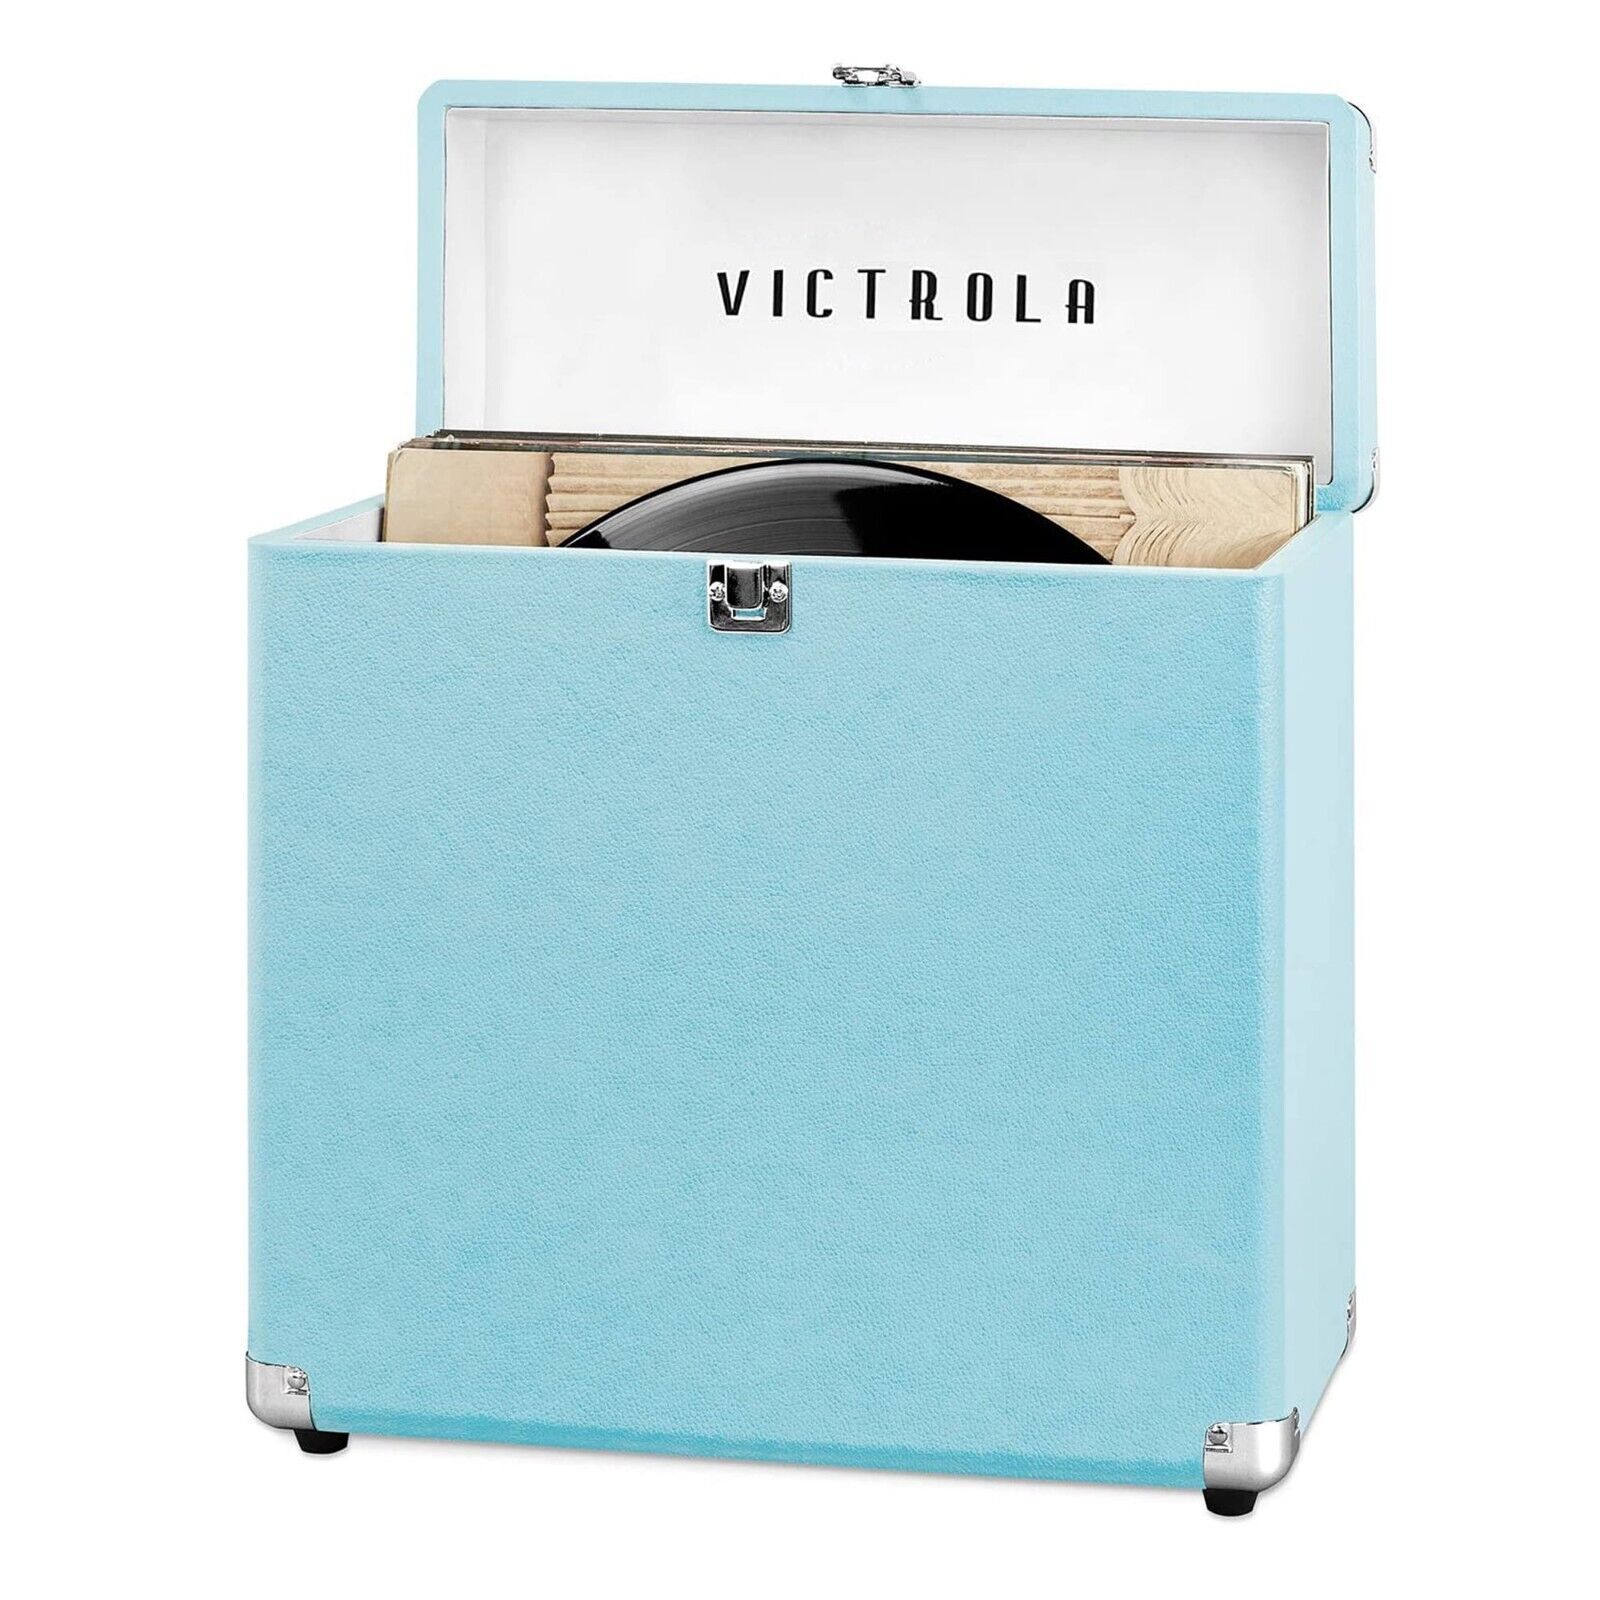 Victrola Collector Storage case for Vinyl Turntable Records